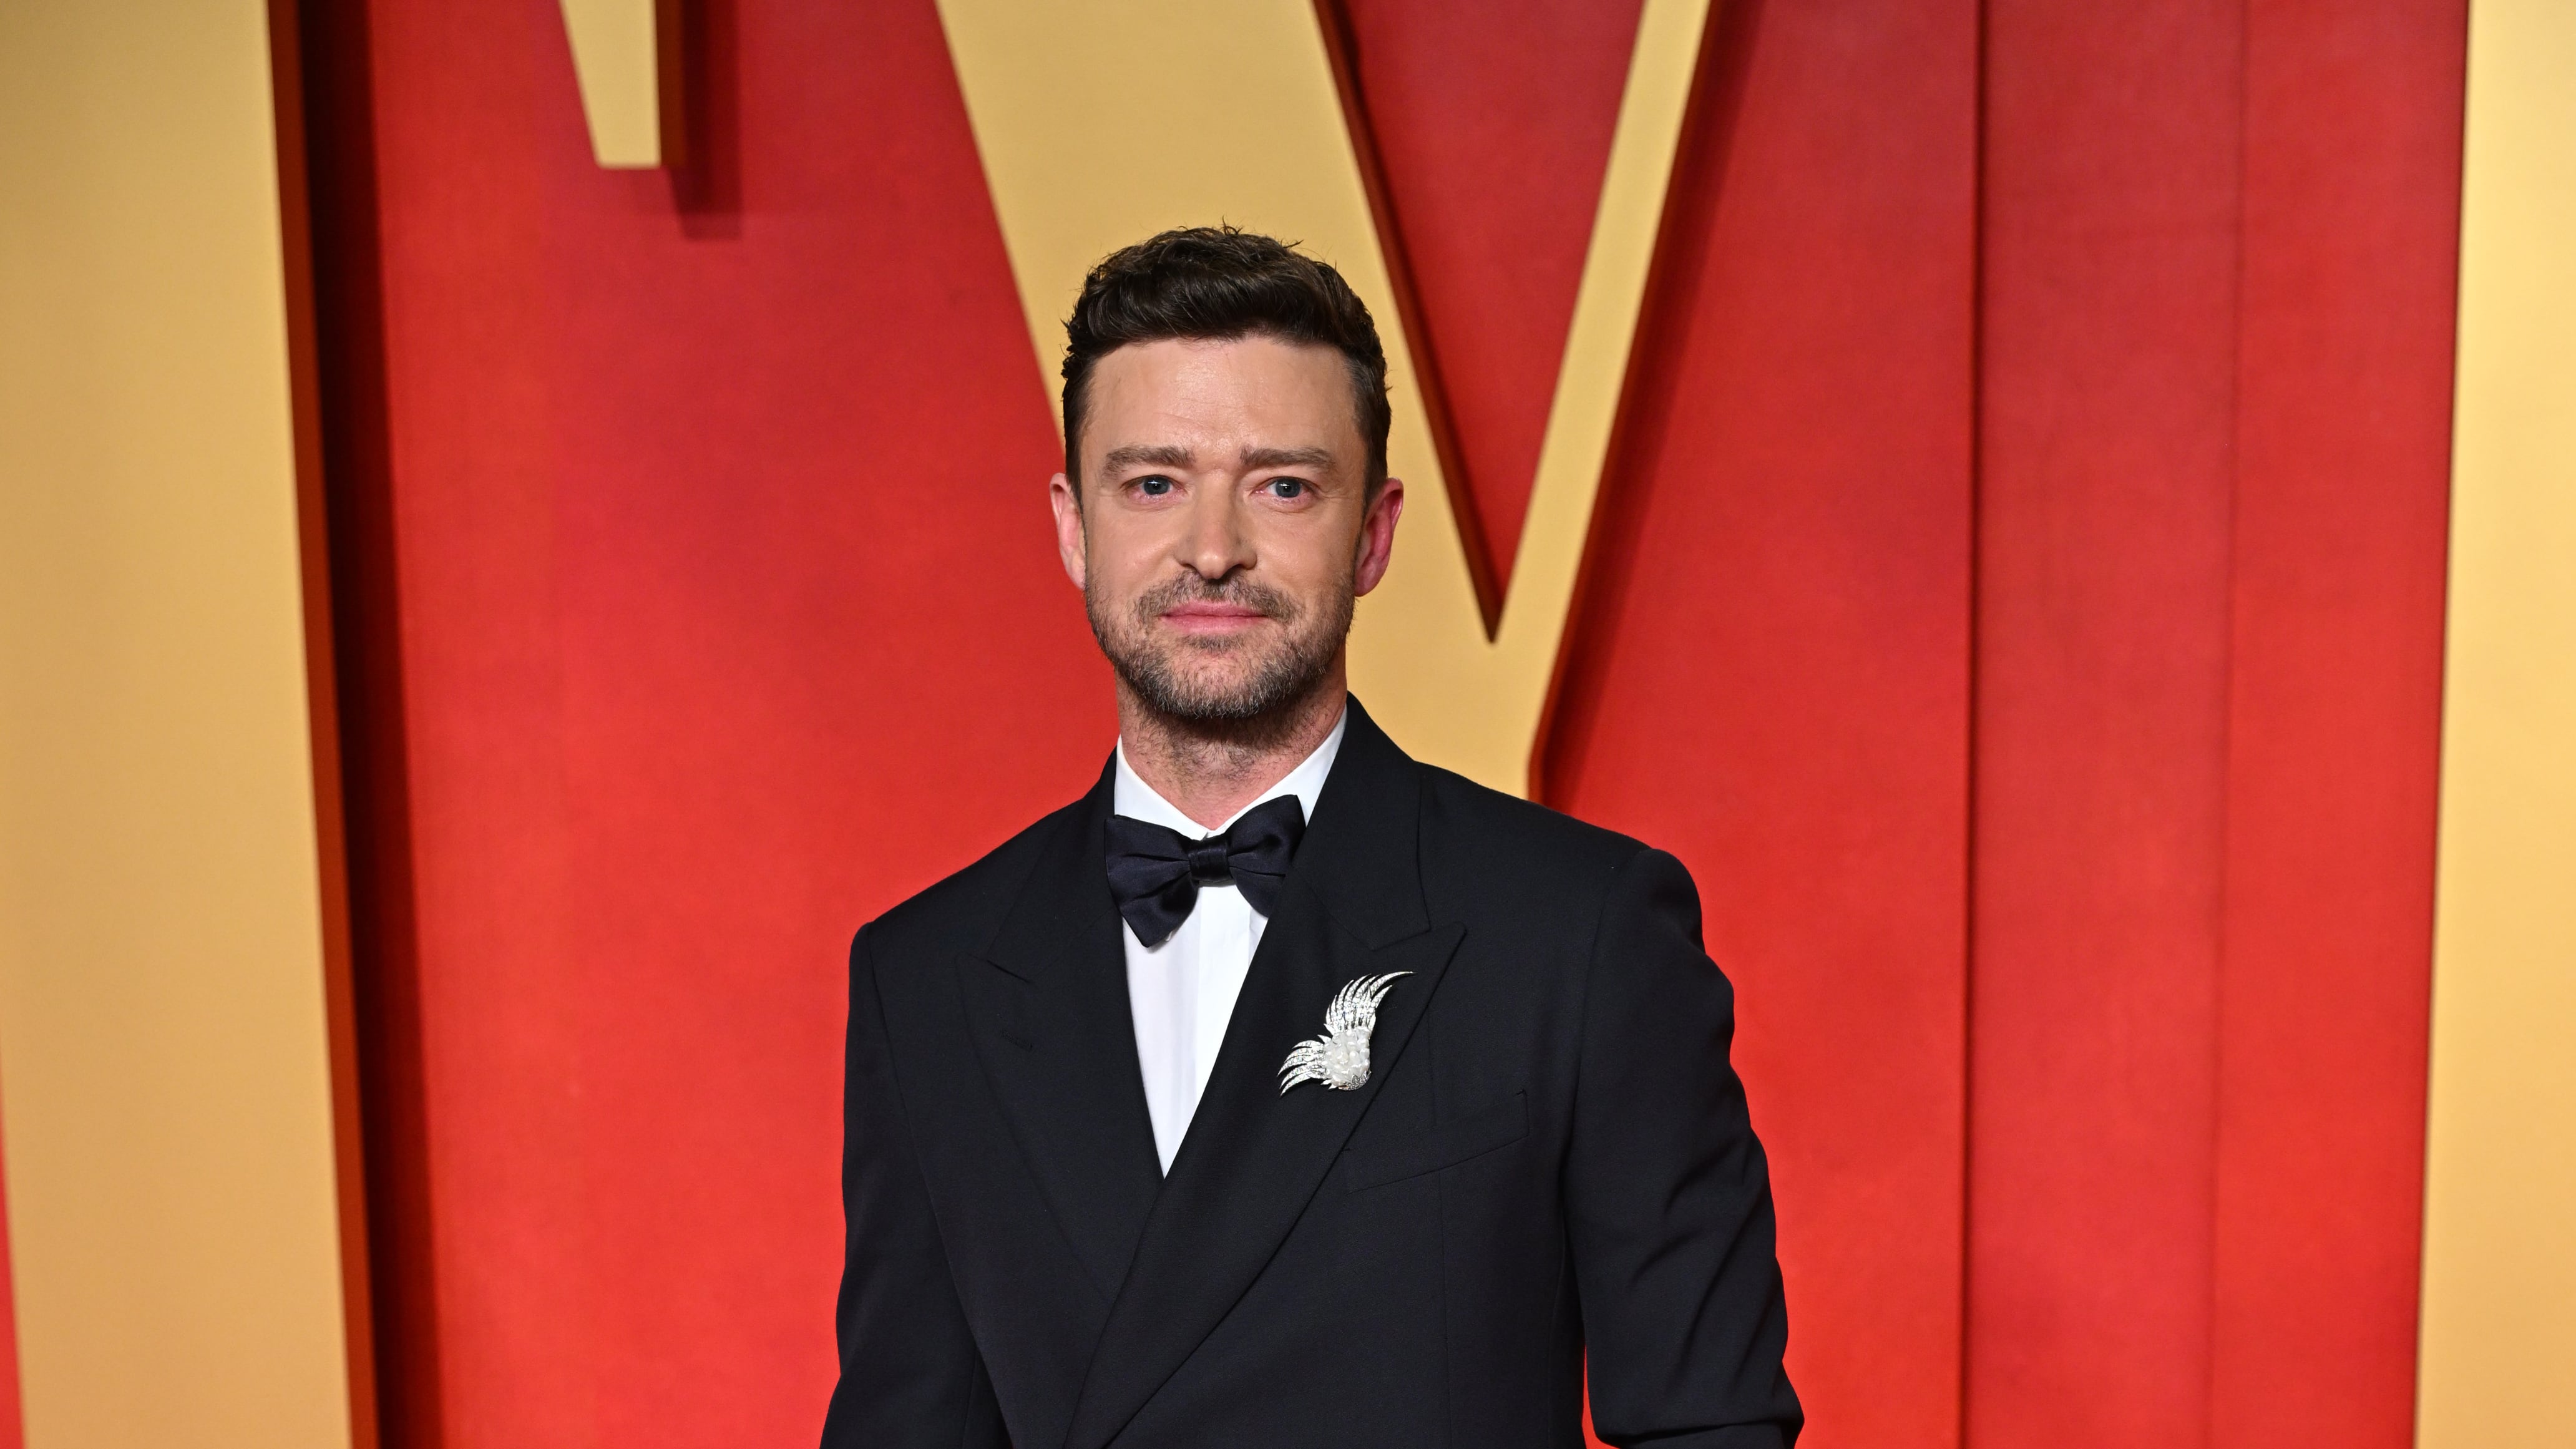 Justin Timberlake was formally charged with a driving while intoxicated misdemeanour before being released on Tuesday